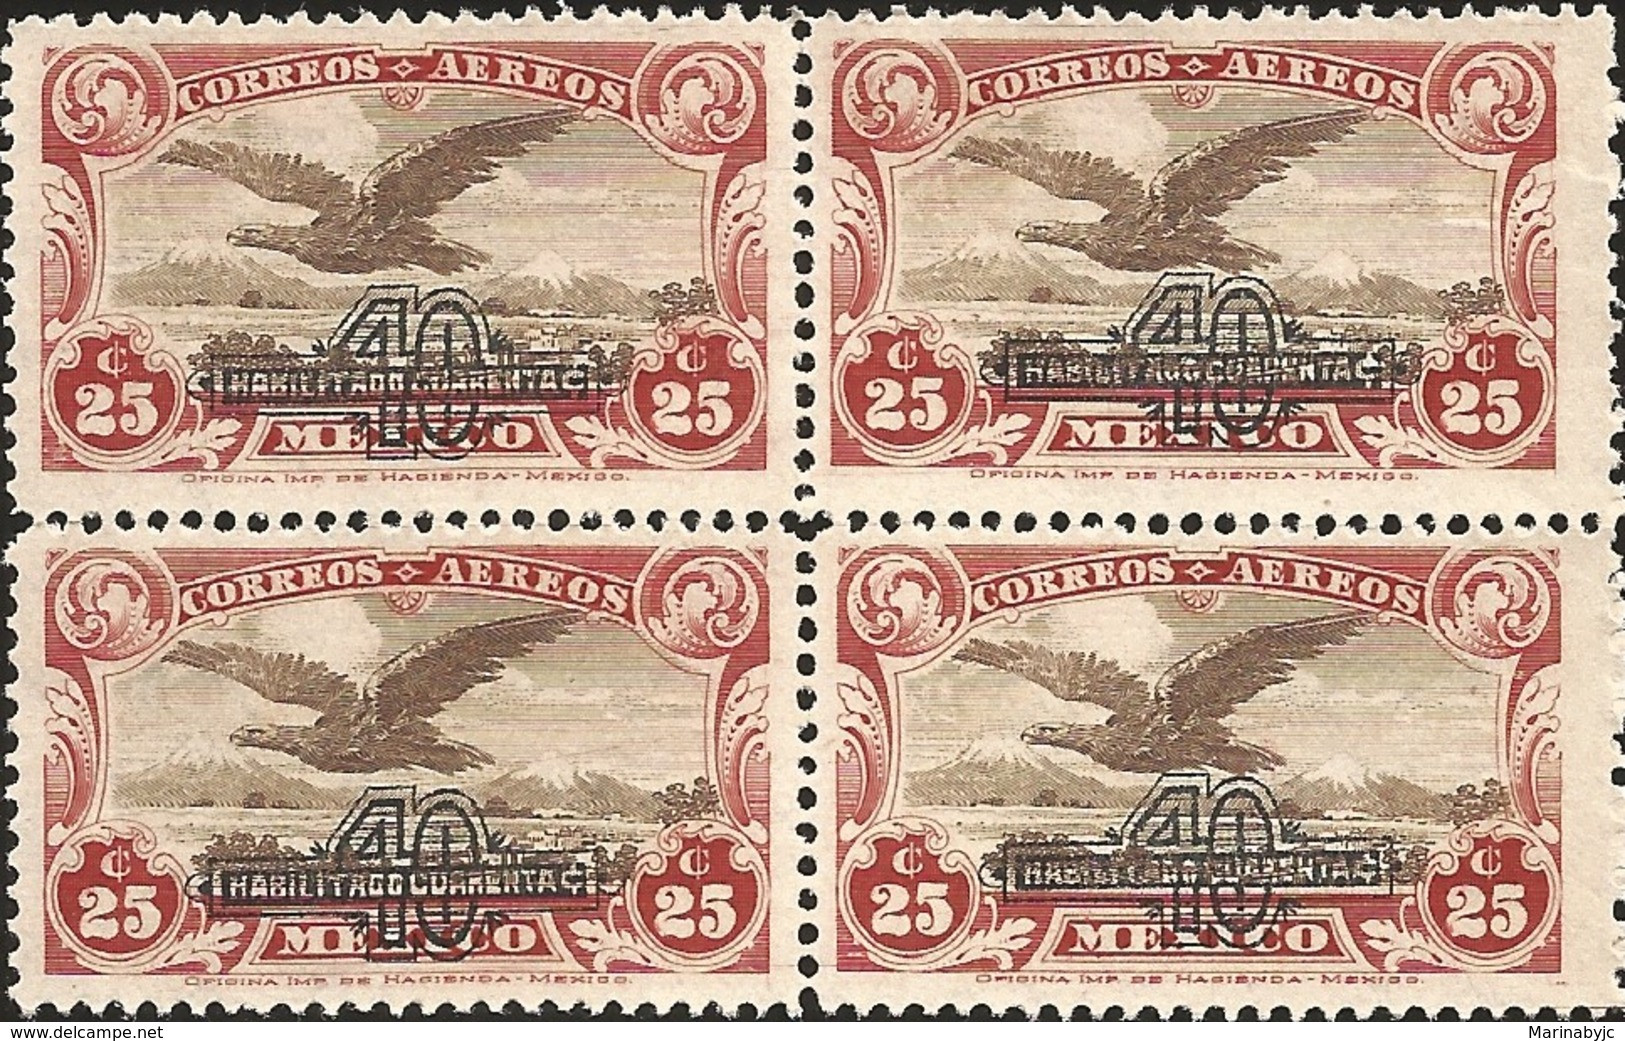 RJ) 1928 MEXICO, BLOCK OF 4, EAGLE OVER MOUNTAINS, WITH OVERPRINT IN BLACK SCOTT C47, MNH - Mexico